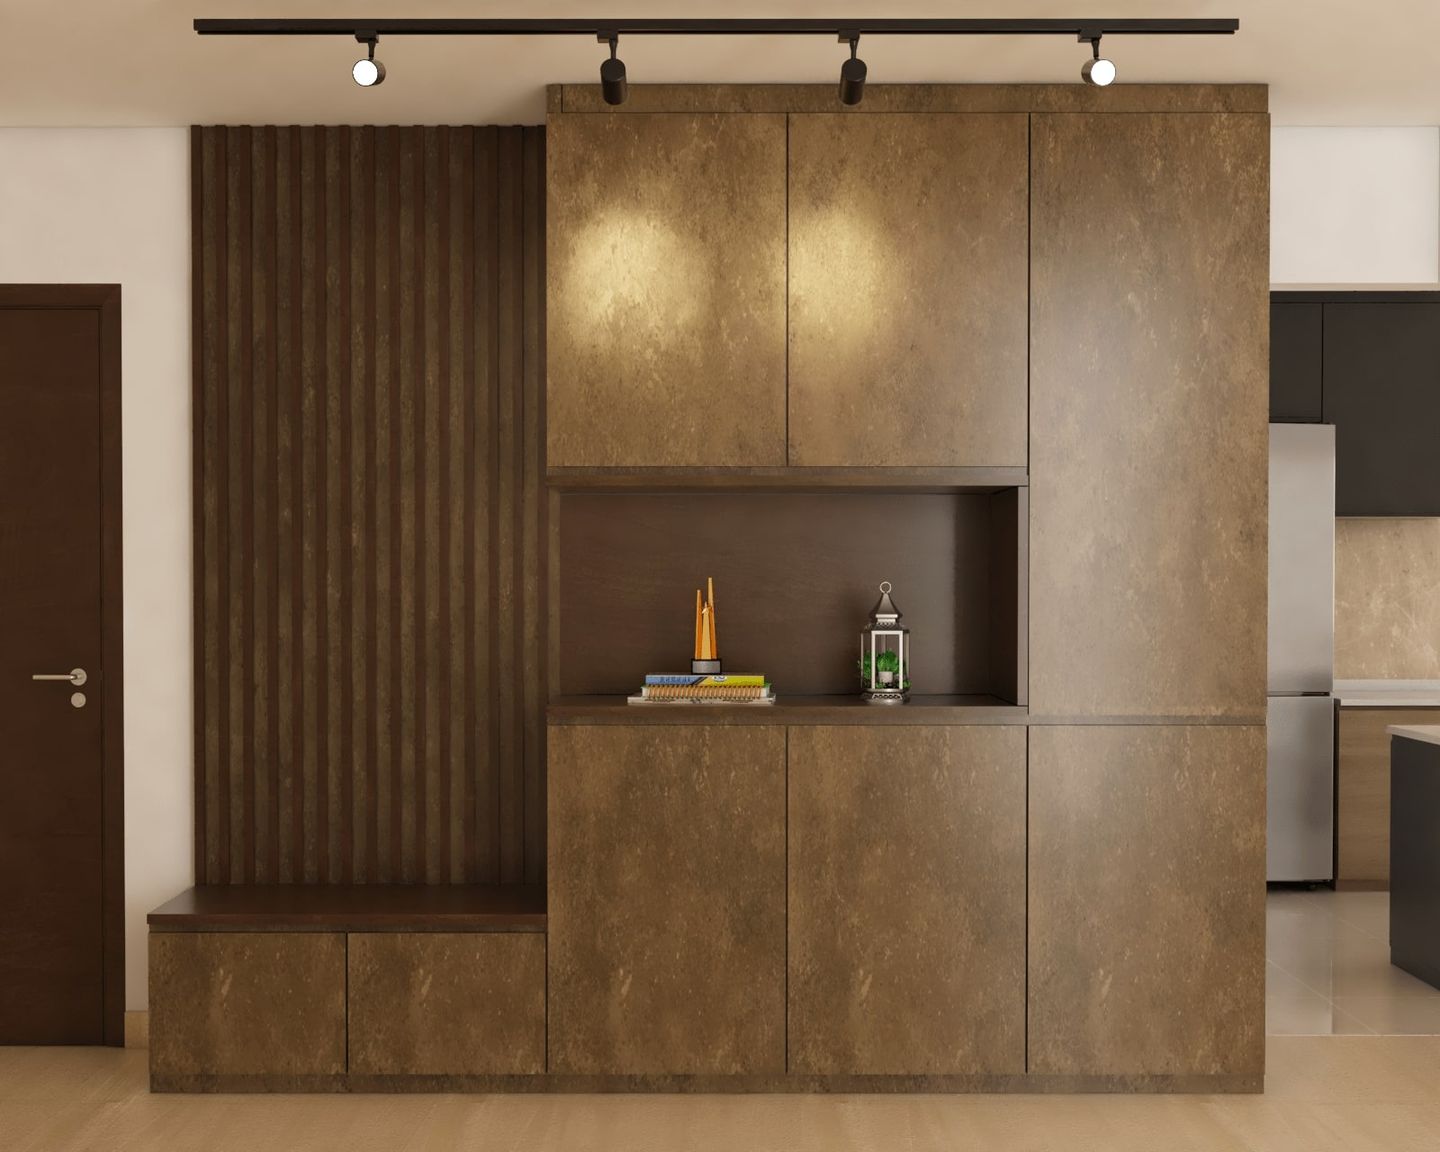 Industrial Laminate Design For Kitchen And Storage Cabinets